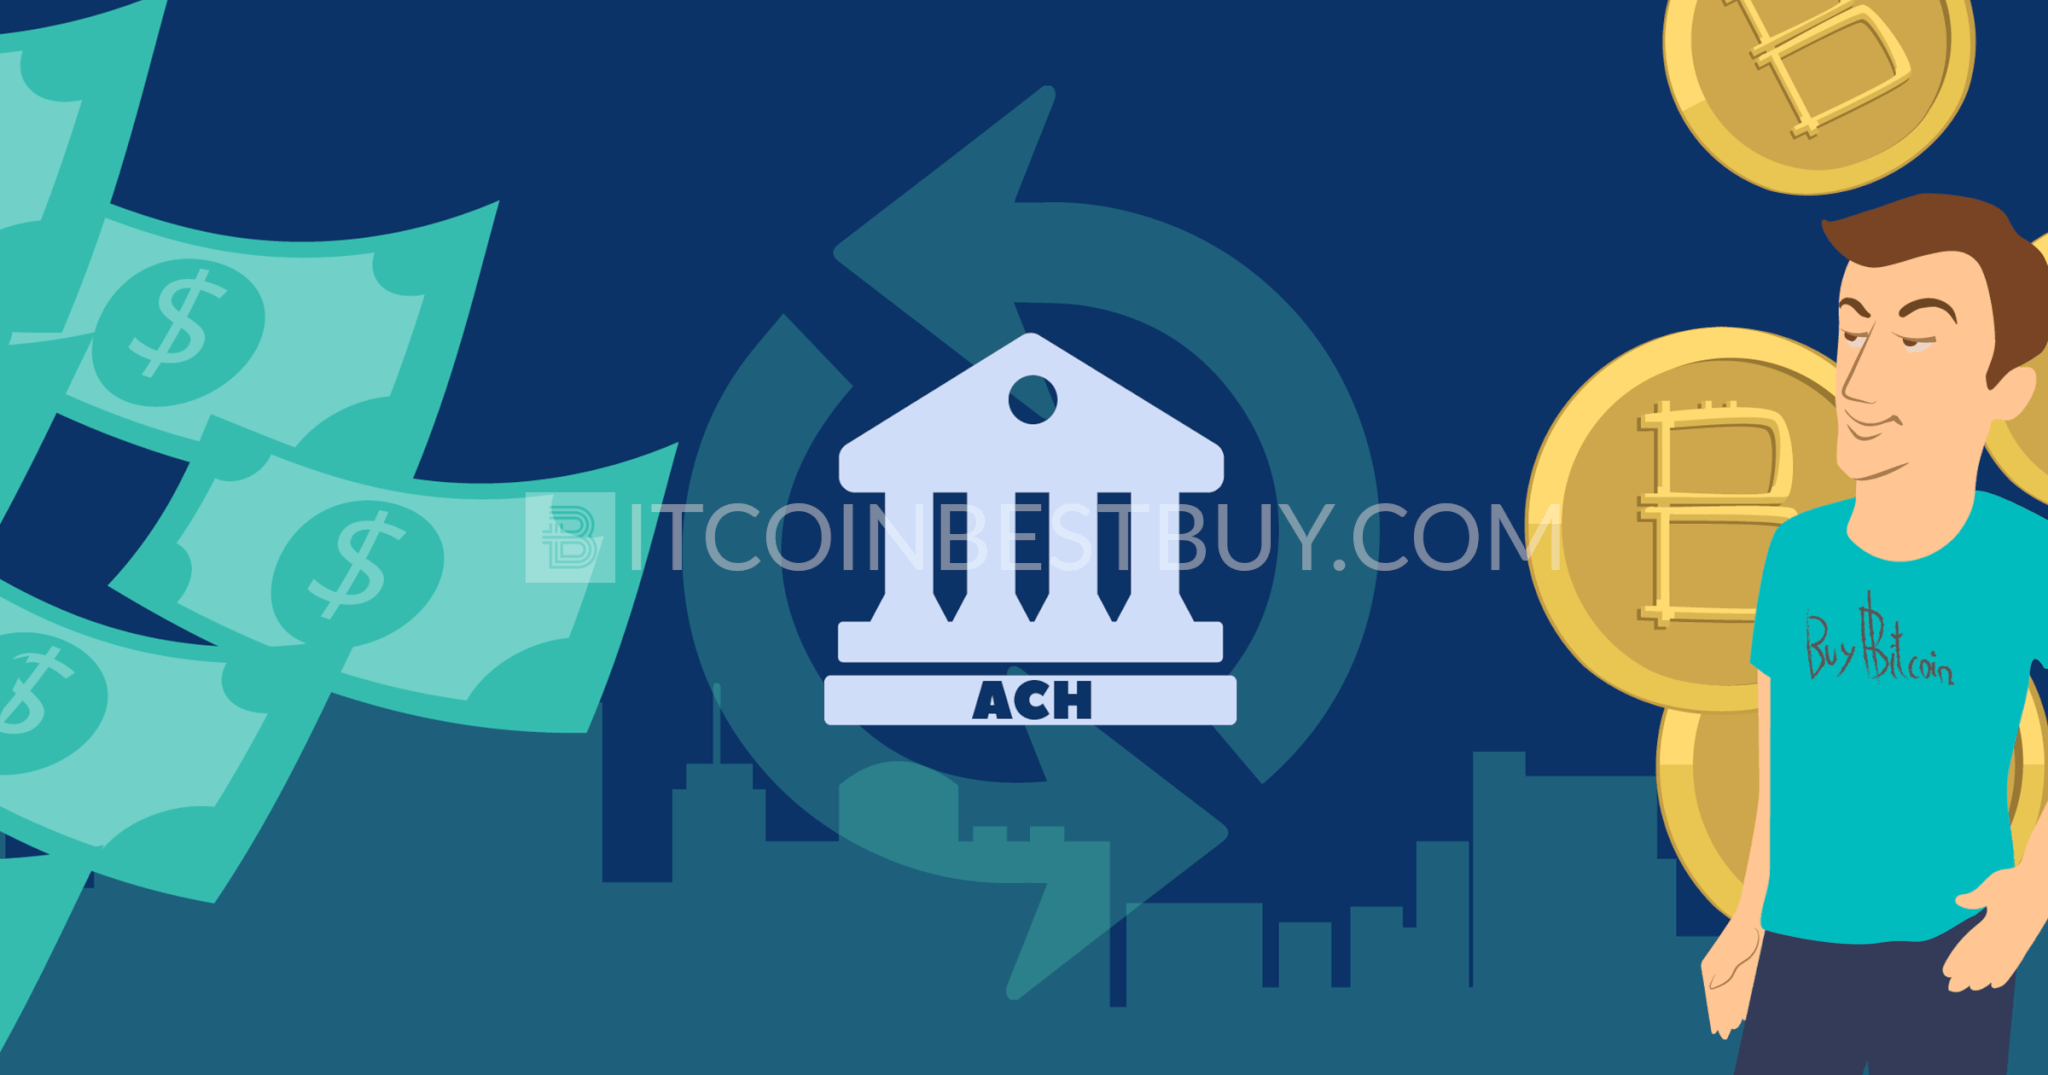 Bitcoin Exchange Accepting Ach Deposit Buy Bitcoin With ...